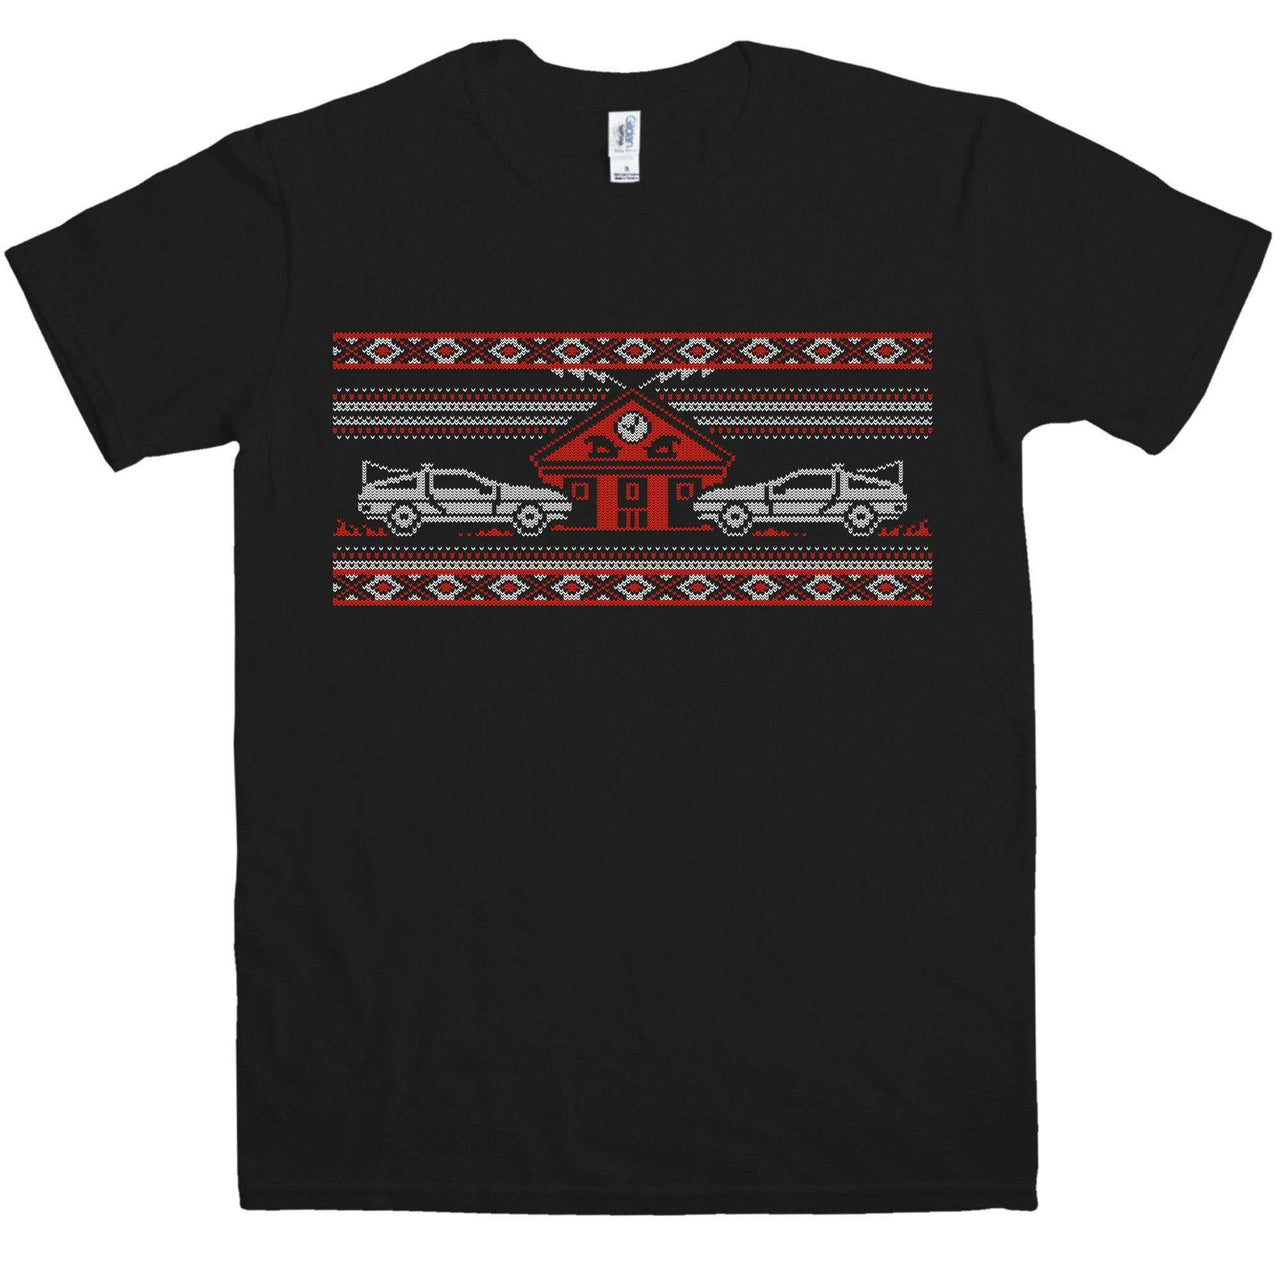 Knitted Jumper Style Bttf Graphic T-Shirt For Men 8Ball